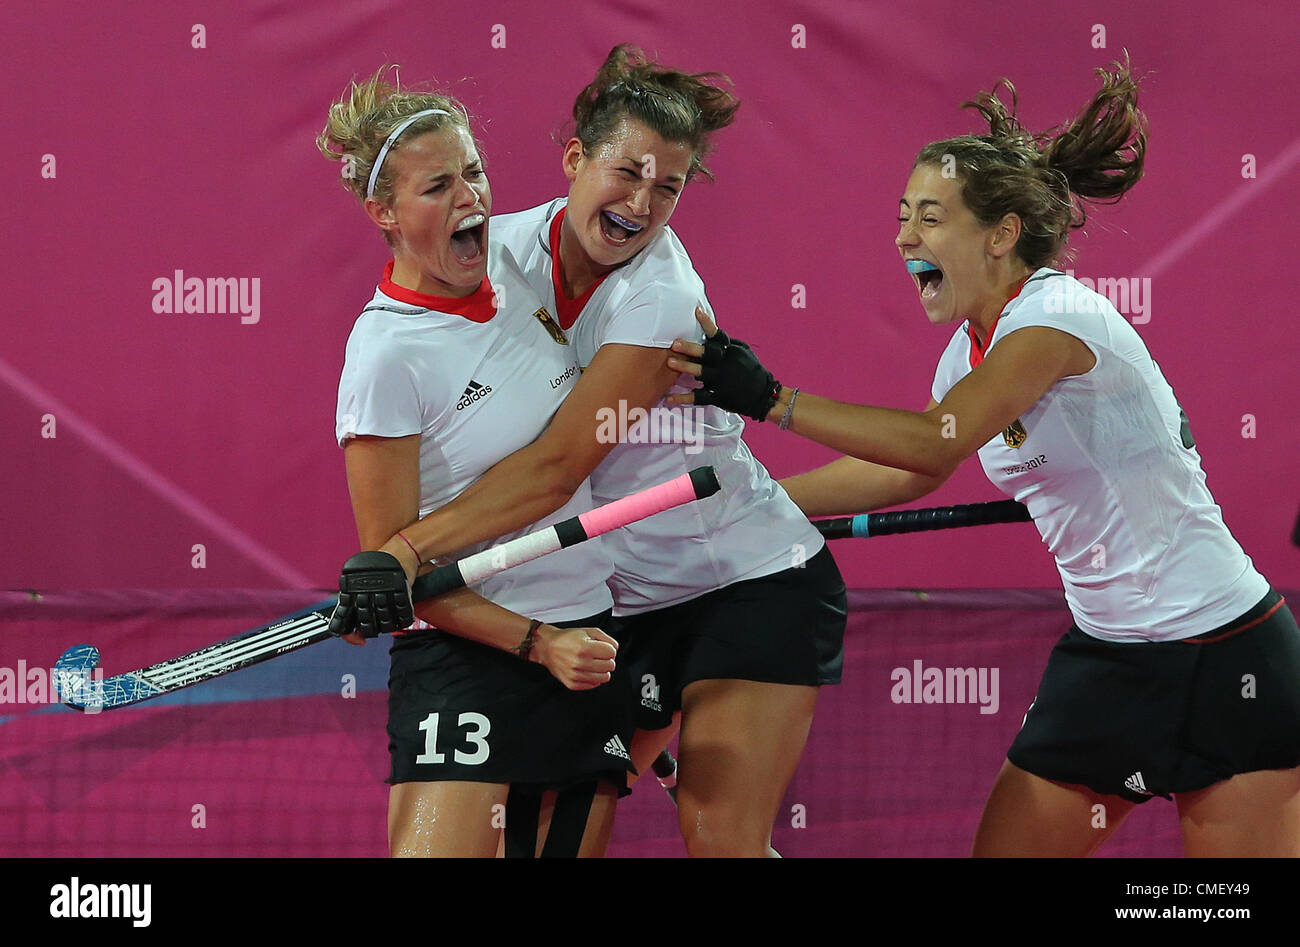 31.07.2012. London England. Germany's Katharina Otte (L) celebrates her goal with team mates Julia Mueller (M) and Marie Maevers during women's field hockey preliminary round match against Australia at Olympic Park Riverbank Arena for the London 2012 Olympic Games, London, Britain, 31 July 2012. Stock Photo